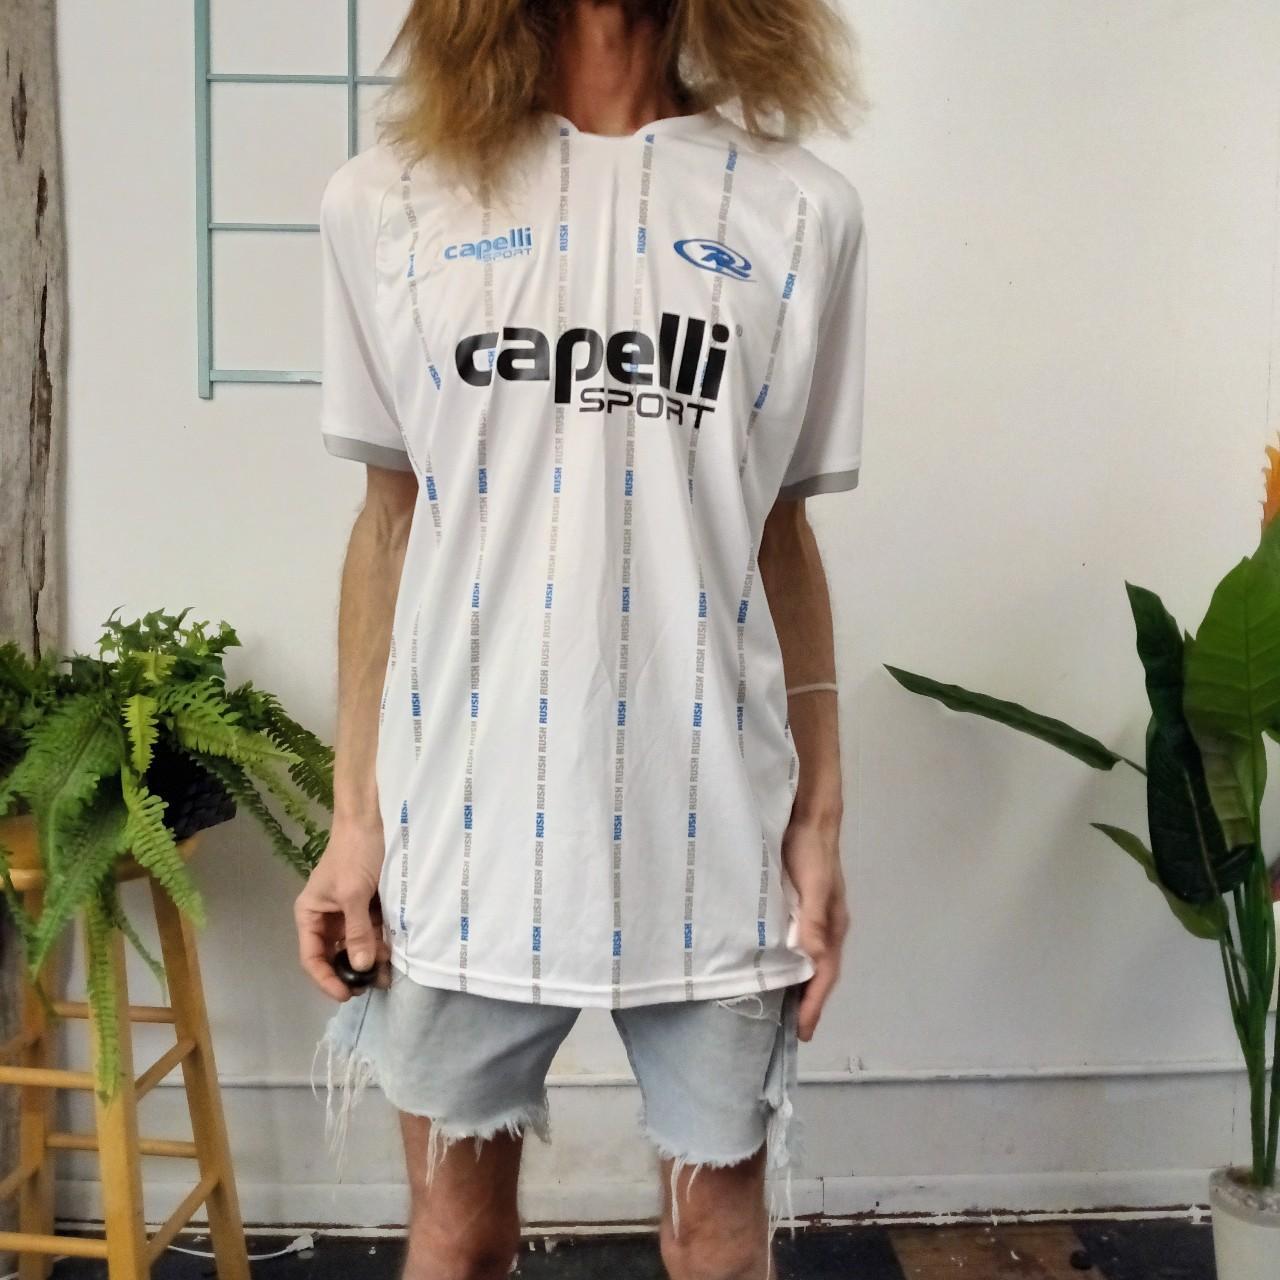 Capelli Sport soccer jersey, to - its... eminently sporty Depop